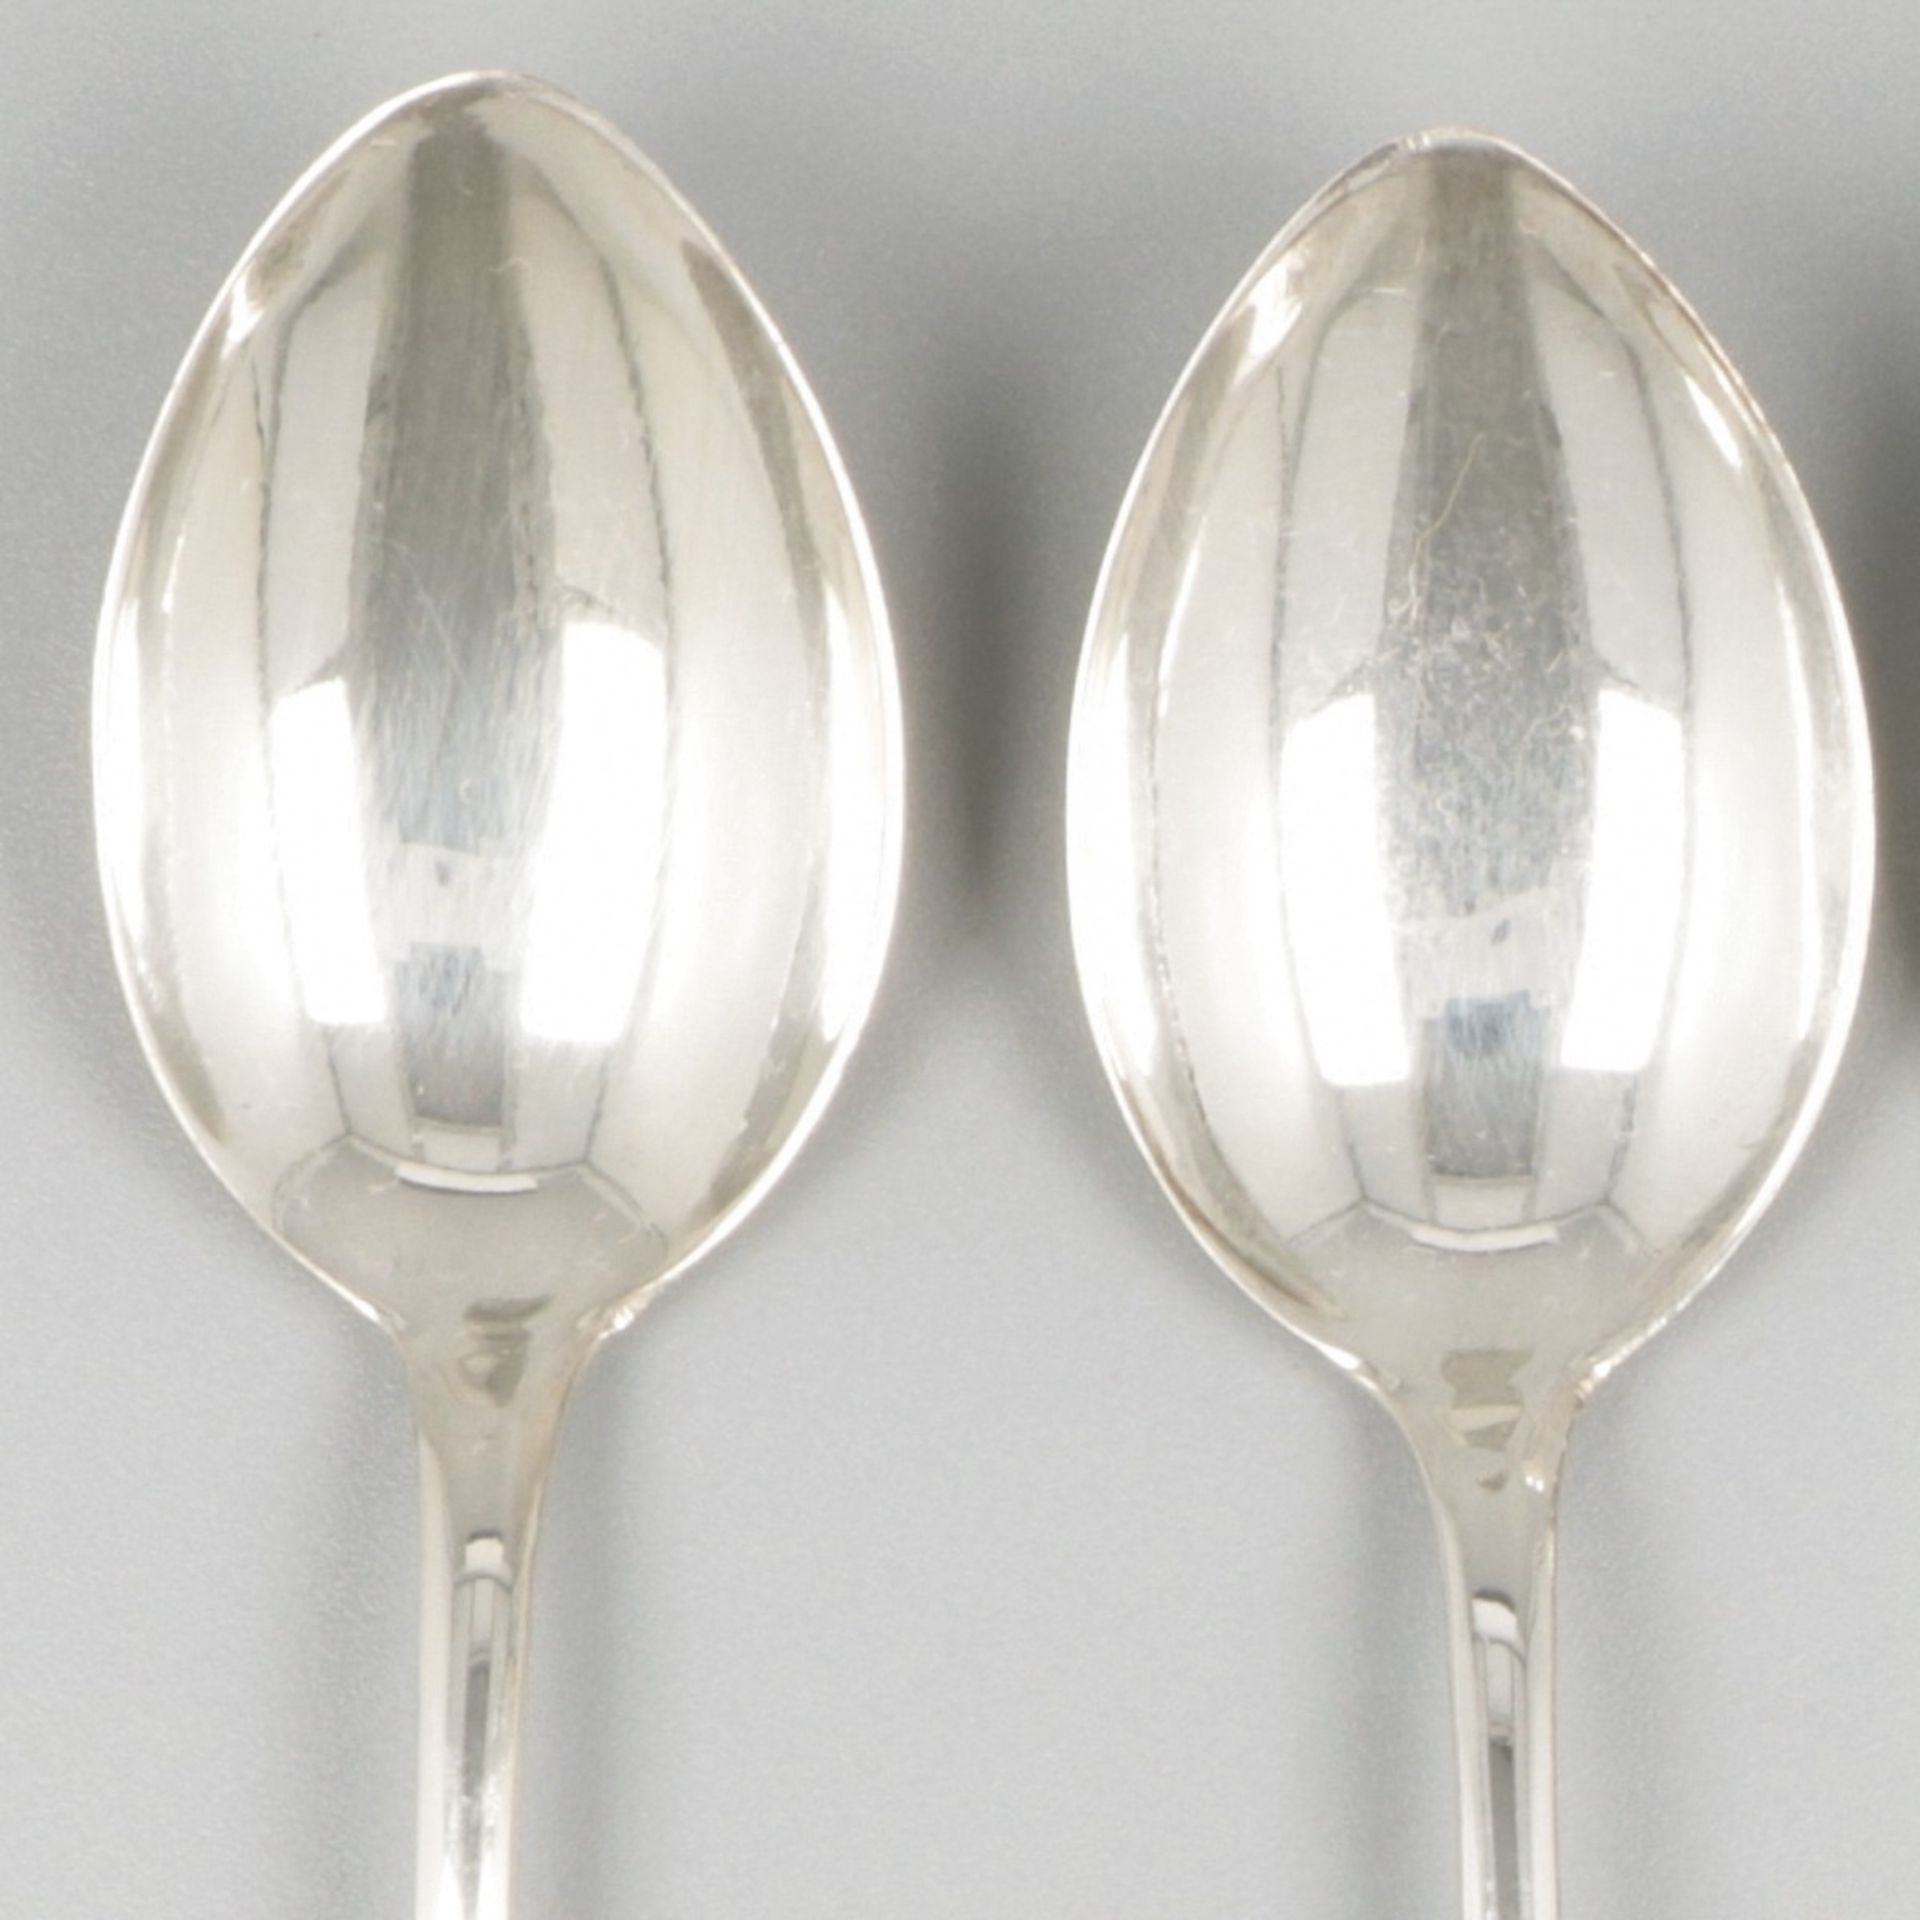 6-piece set of silver coffee spoons. - Image 4 of 5